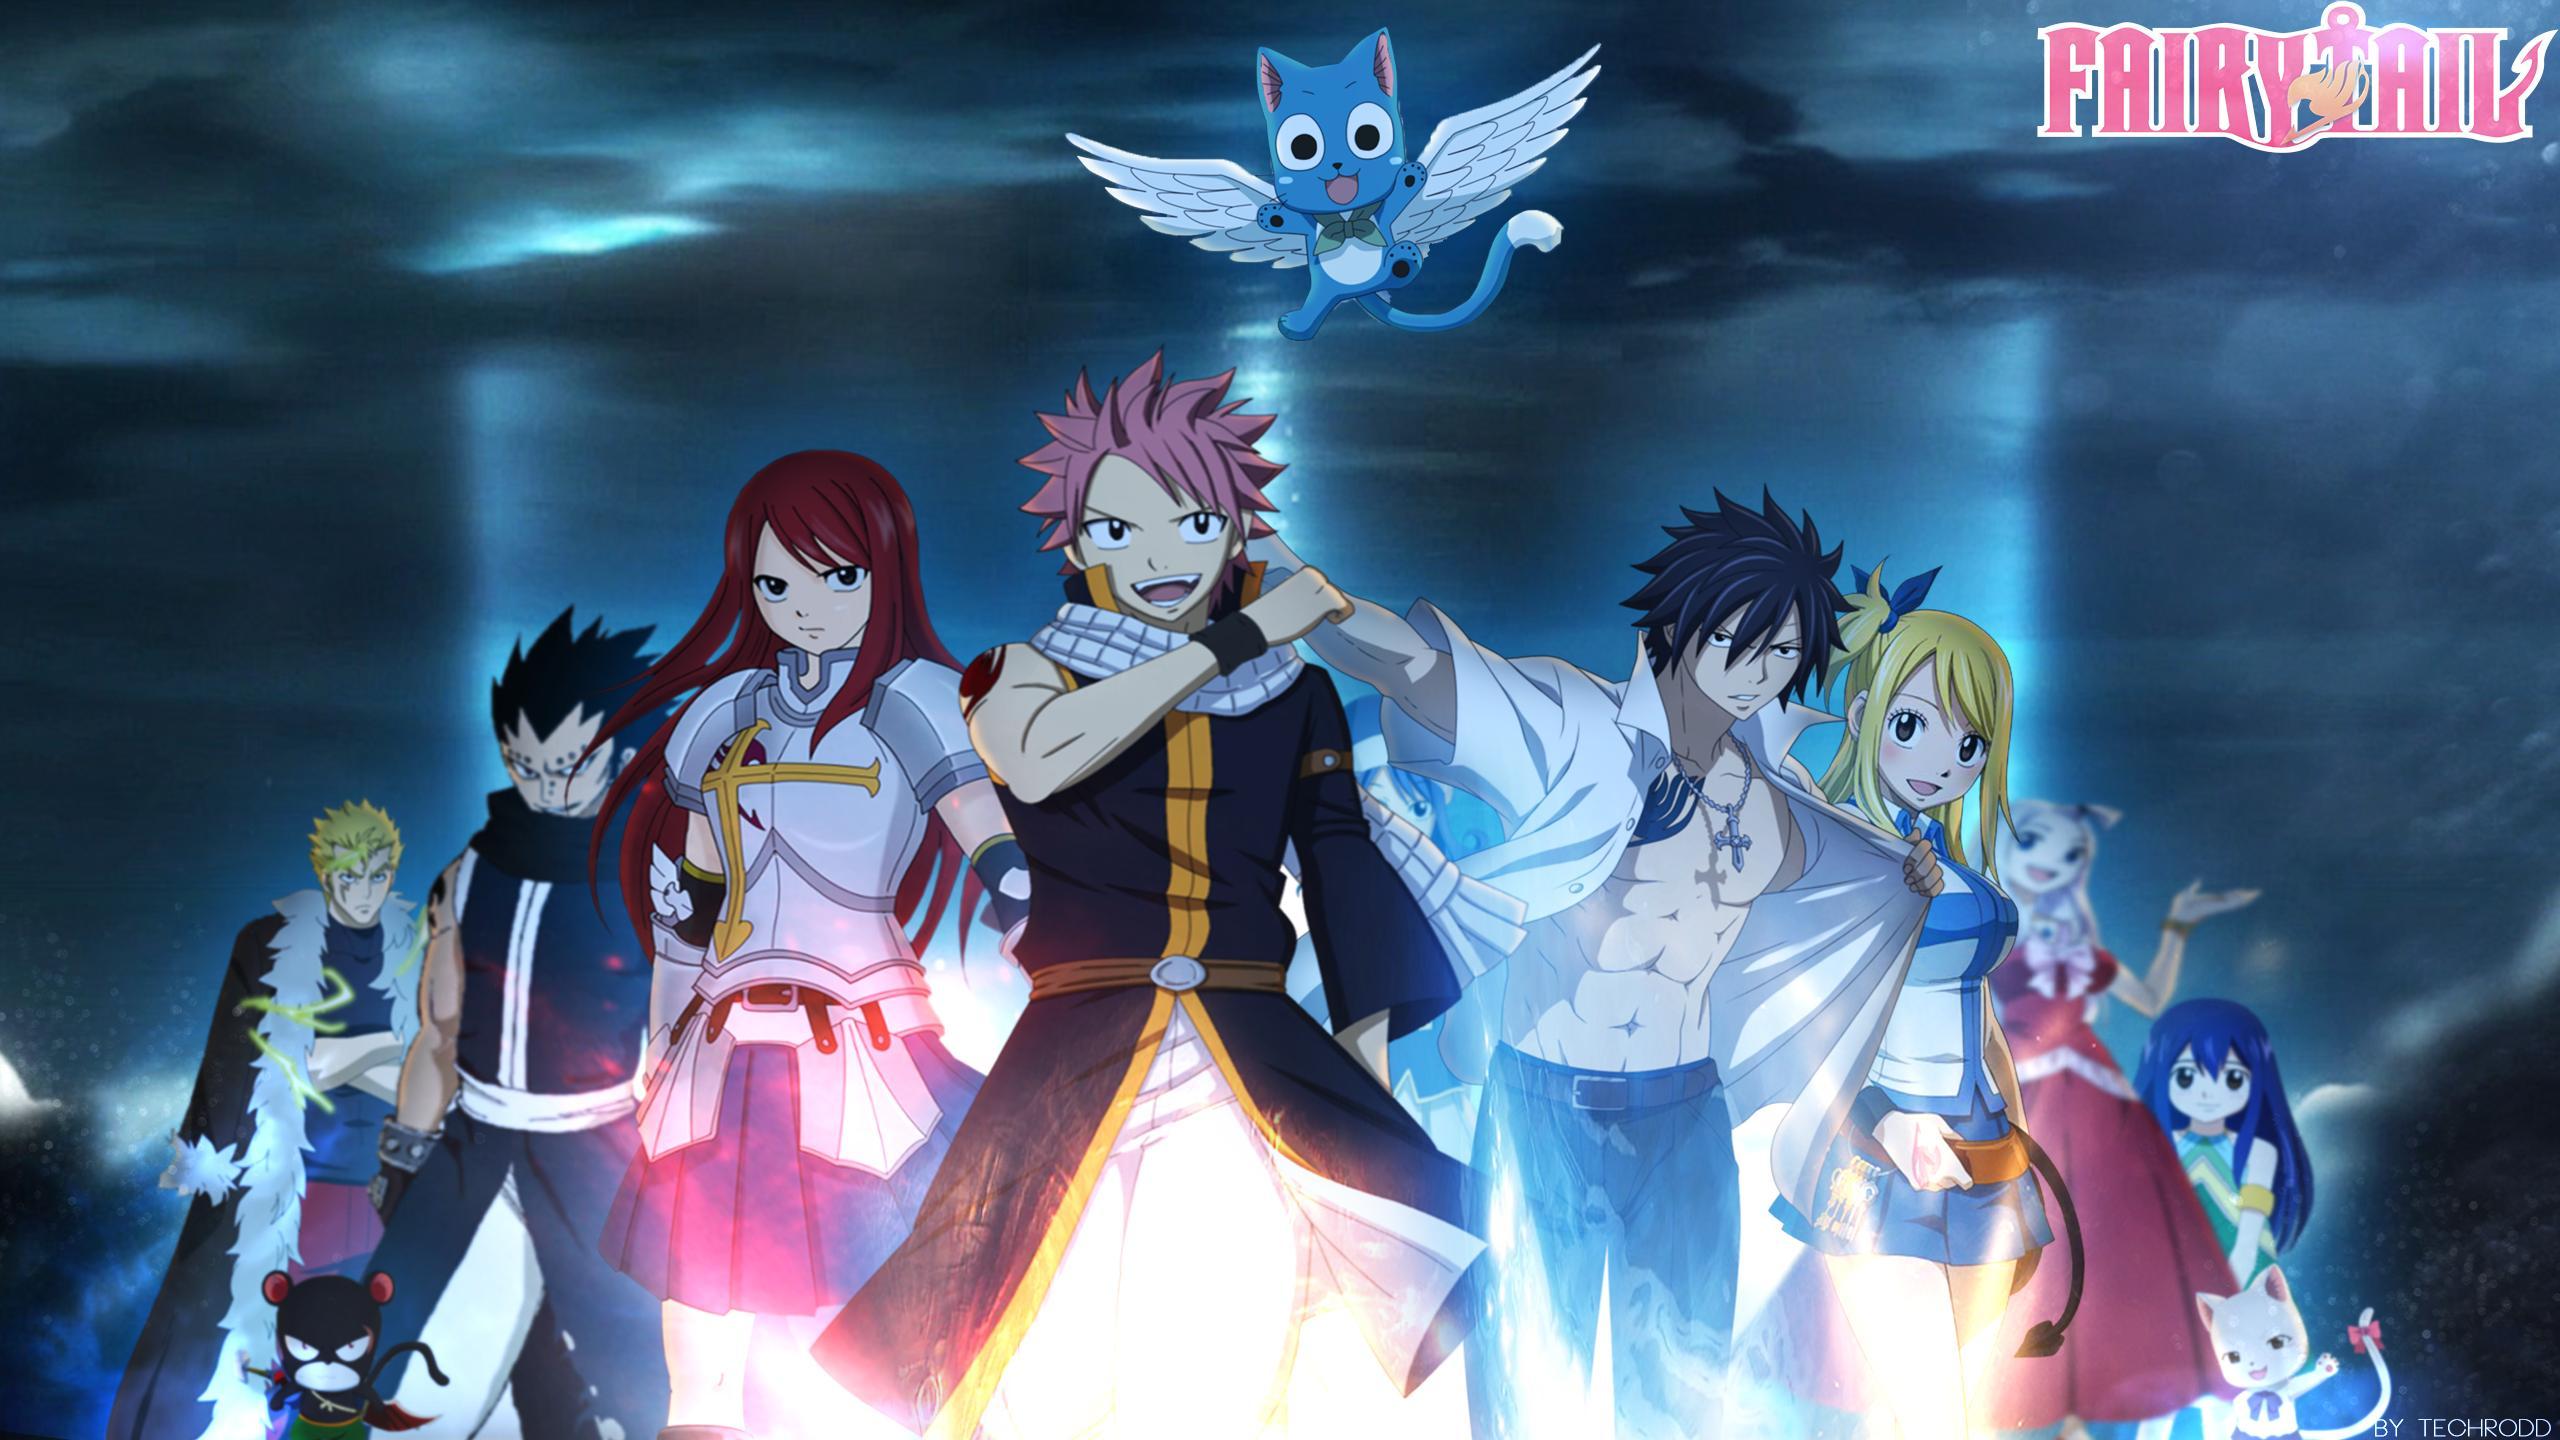 Fairy Tail 498 Spoilers: Invel Makes His Appearance; Gray To Go Up